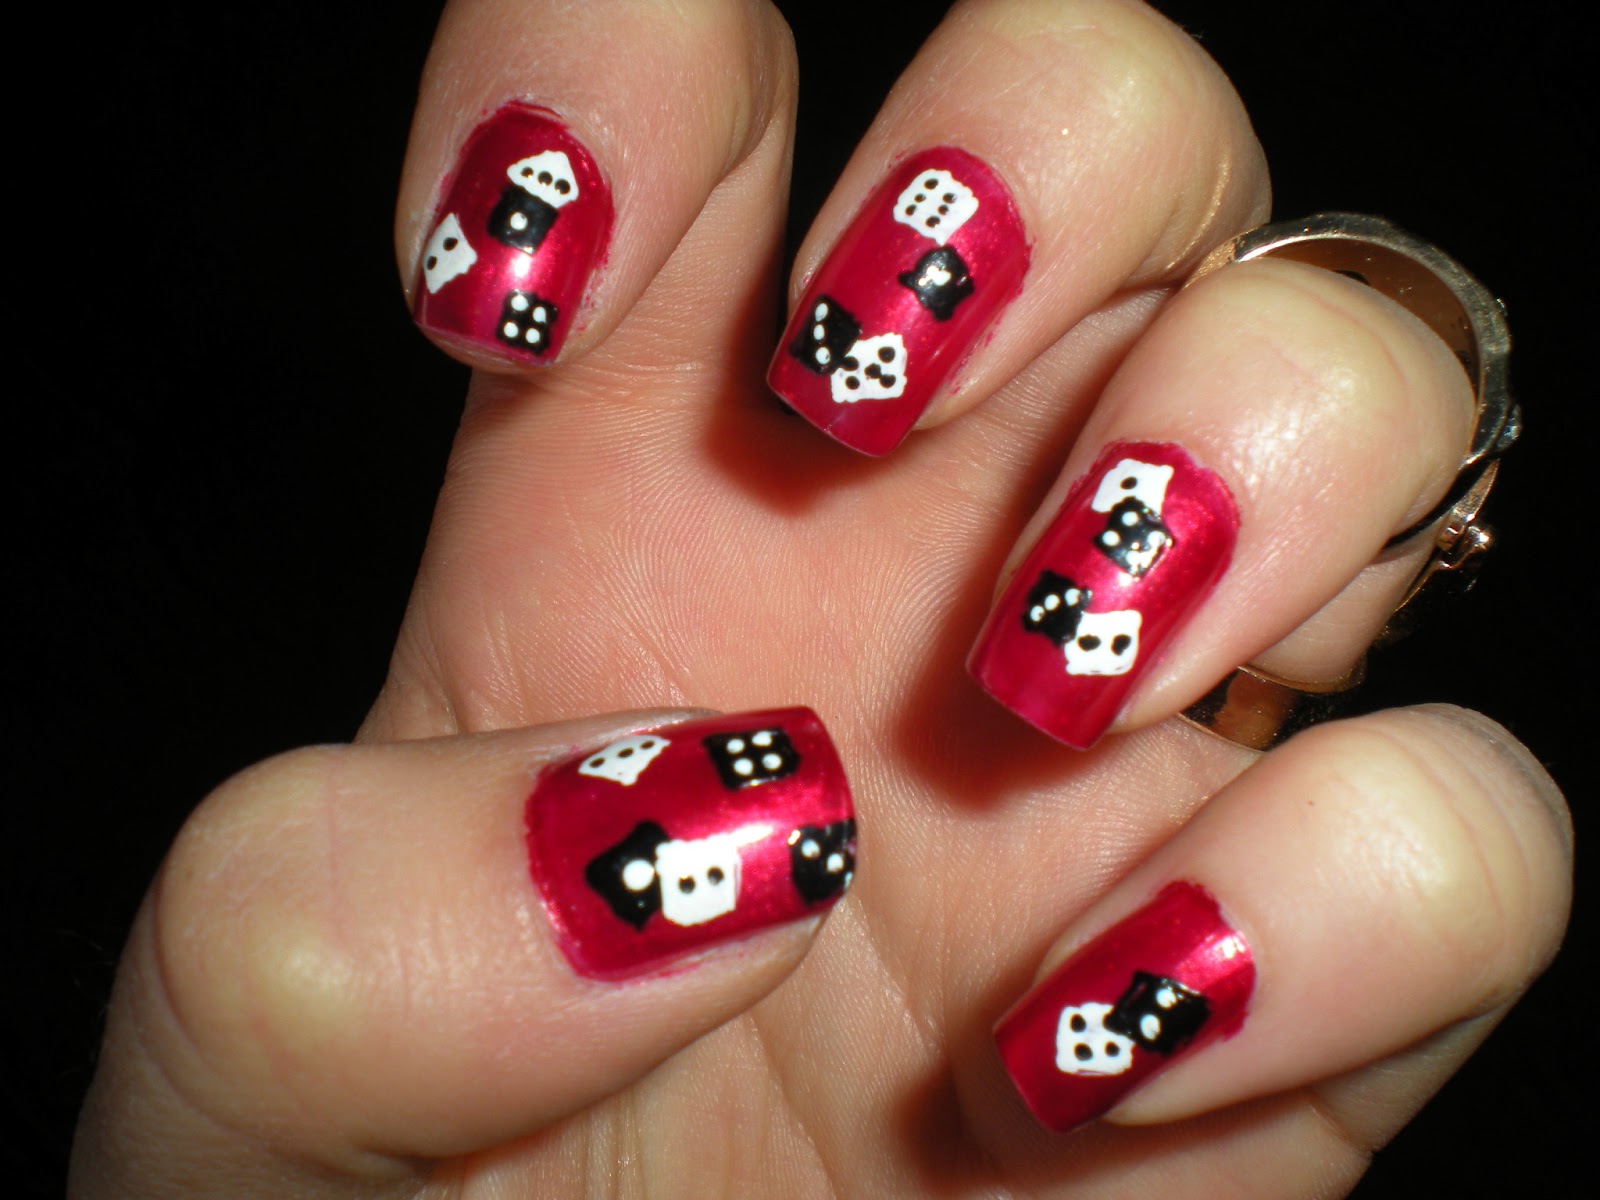 3. Casino Themed Nails - wide 1